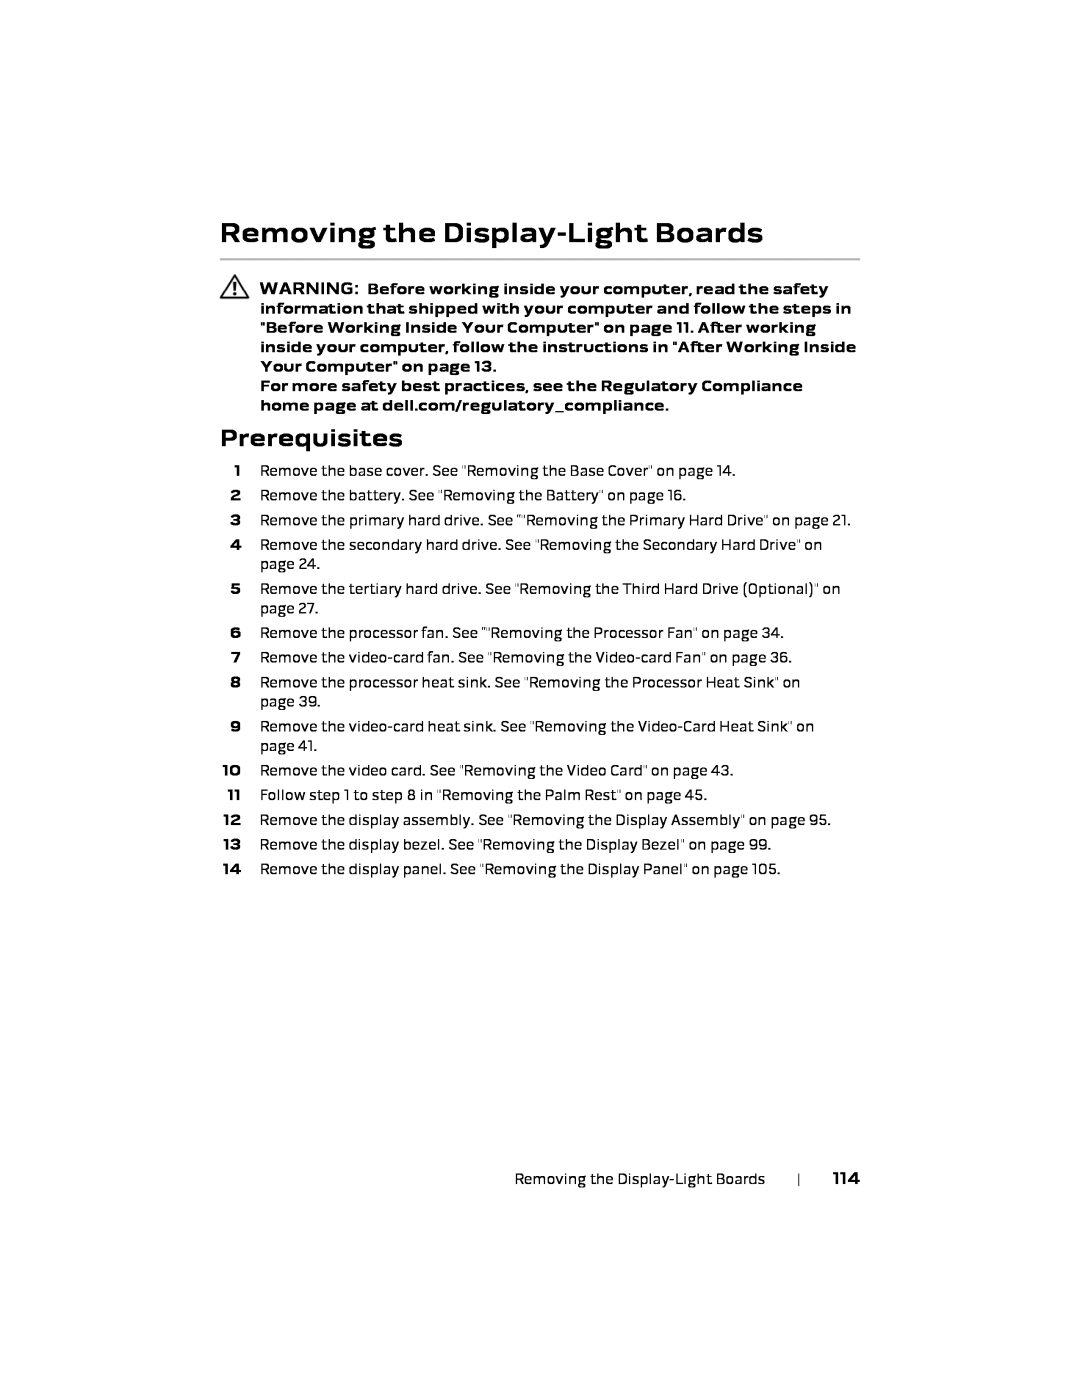 Alienware P18E, 17 R1 owner manual Removing the Display-Light Boards, Prerequisites 